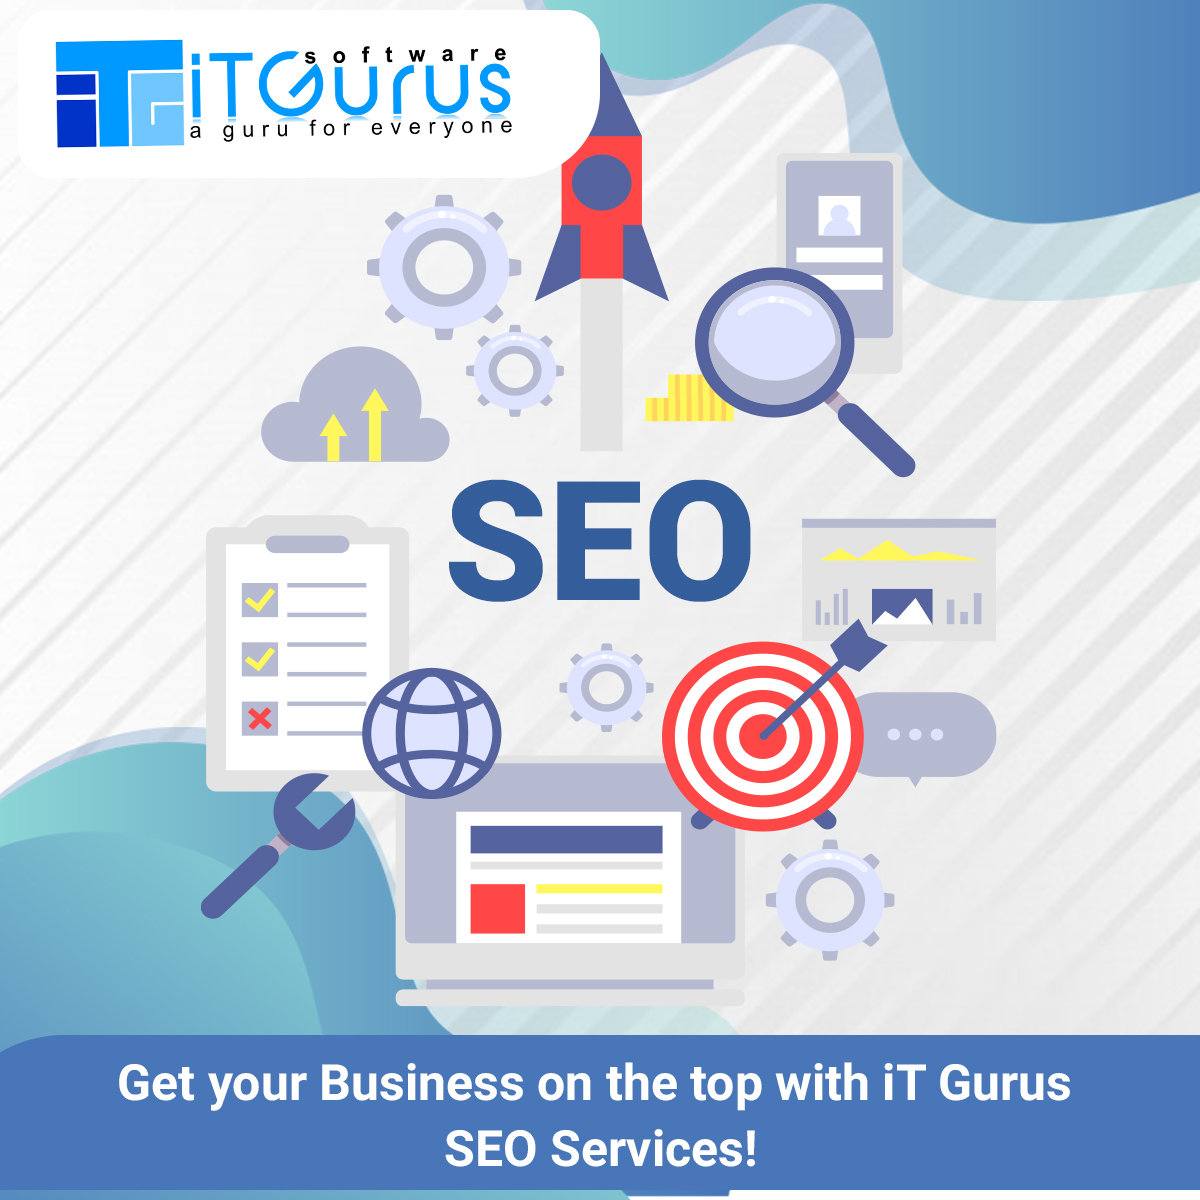 Get your websites shifted on the top with #iTGurus SEO Services!
Get In Touch With Us :itgurussoftware.com

#TranscendentalITServices #digitalmarketing #serachenginemarketing #seo #seoservices #growthmarketing #businesssolutionoutsourcing  #ITservices  #business #branding